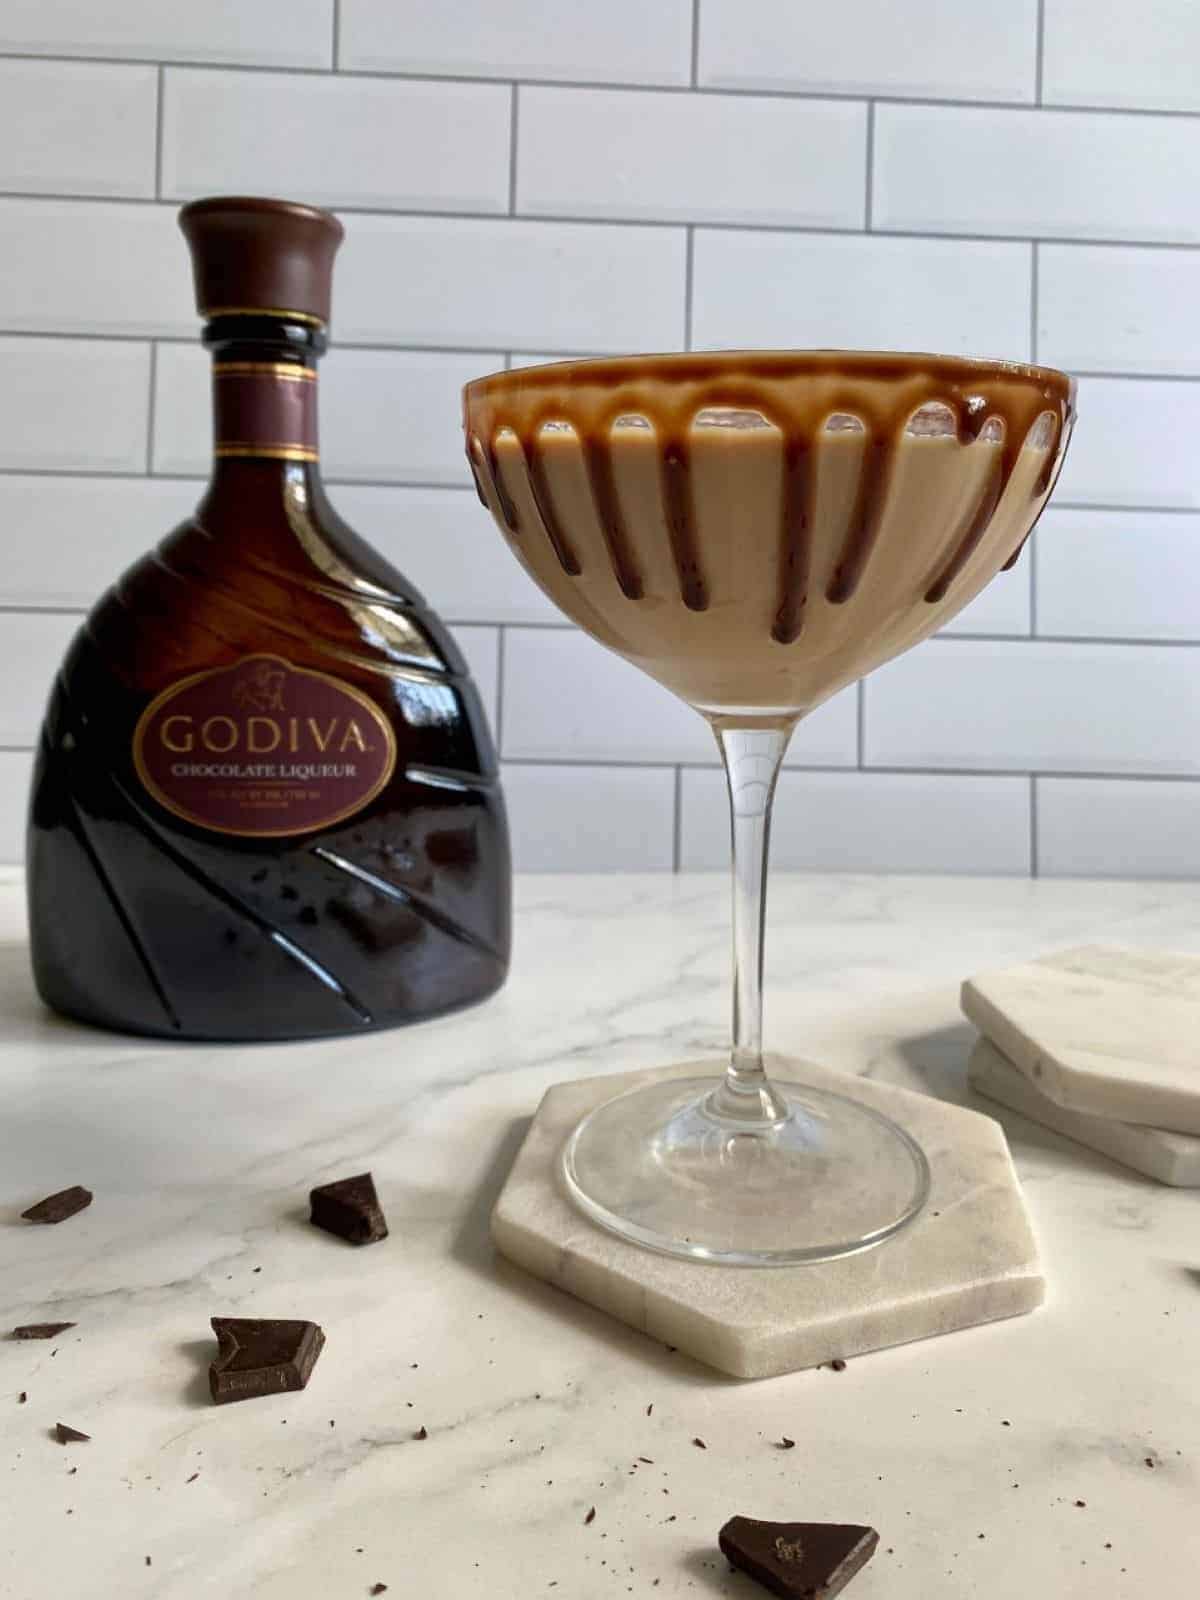 18 - Godiva-chocolate-martini-in-a-tall-glass-with-chocolate-syrup-drizzle-martini-recipes